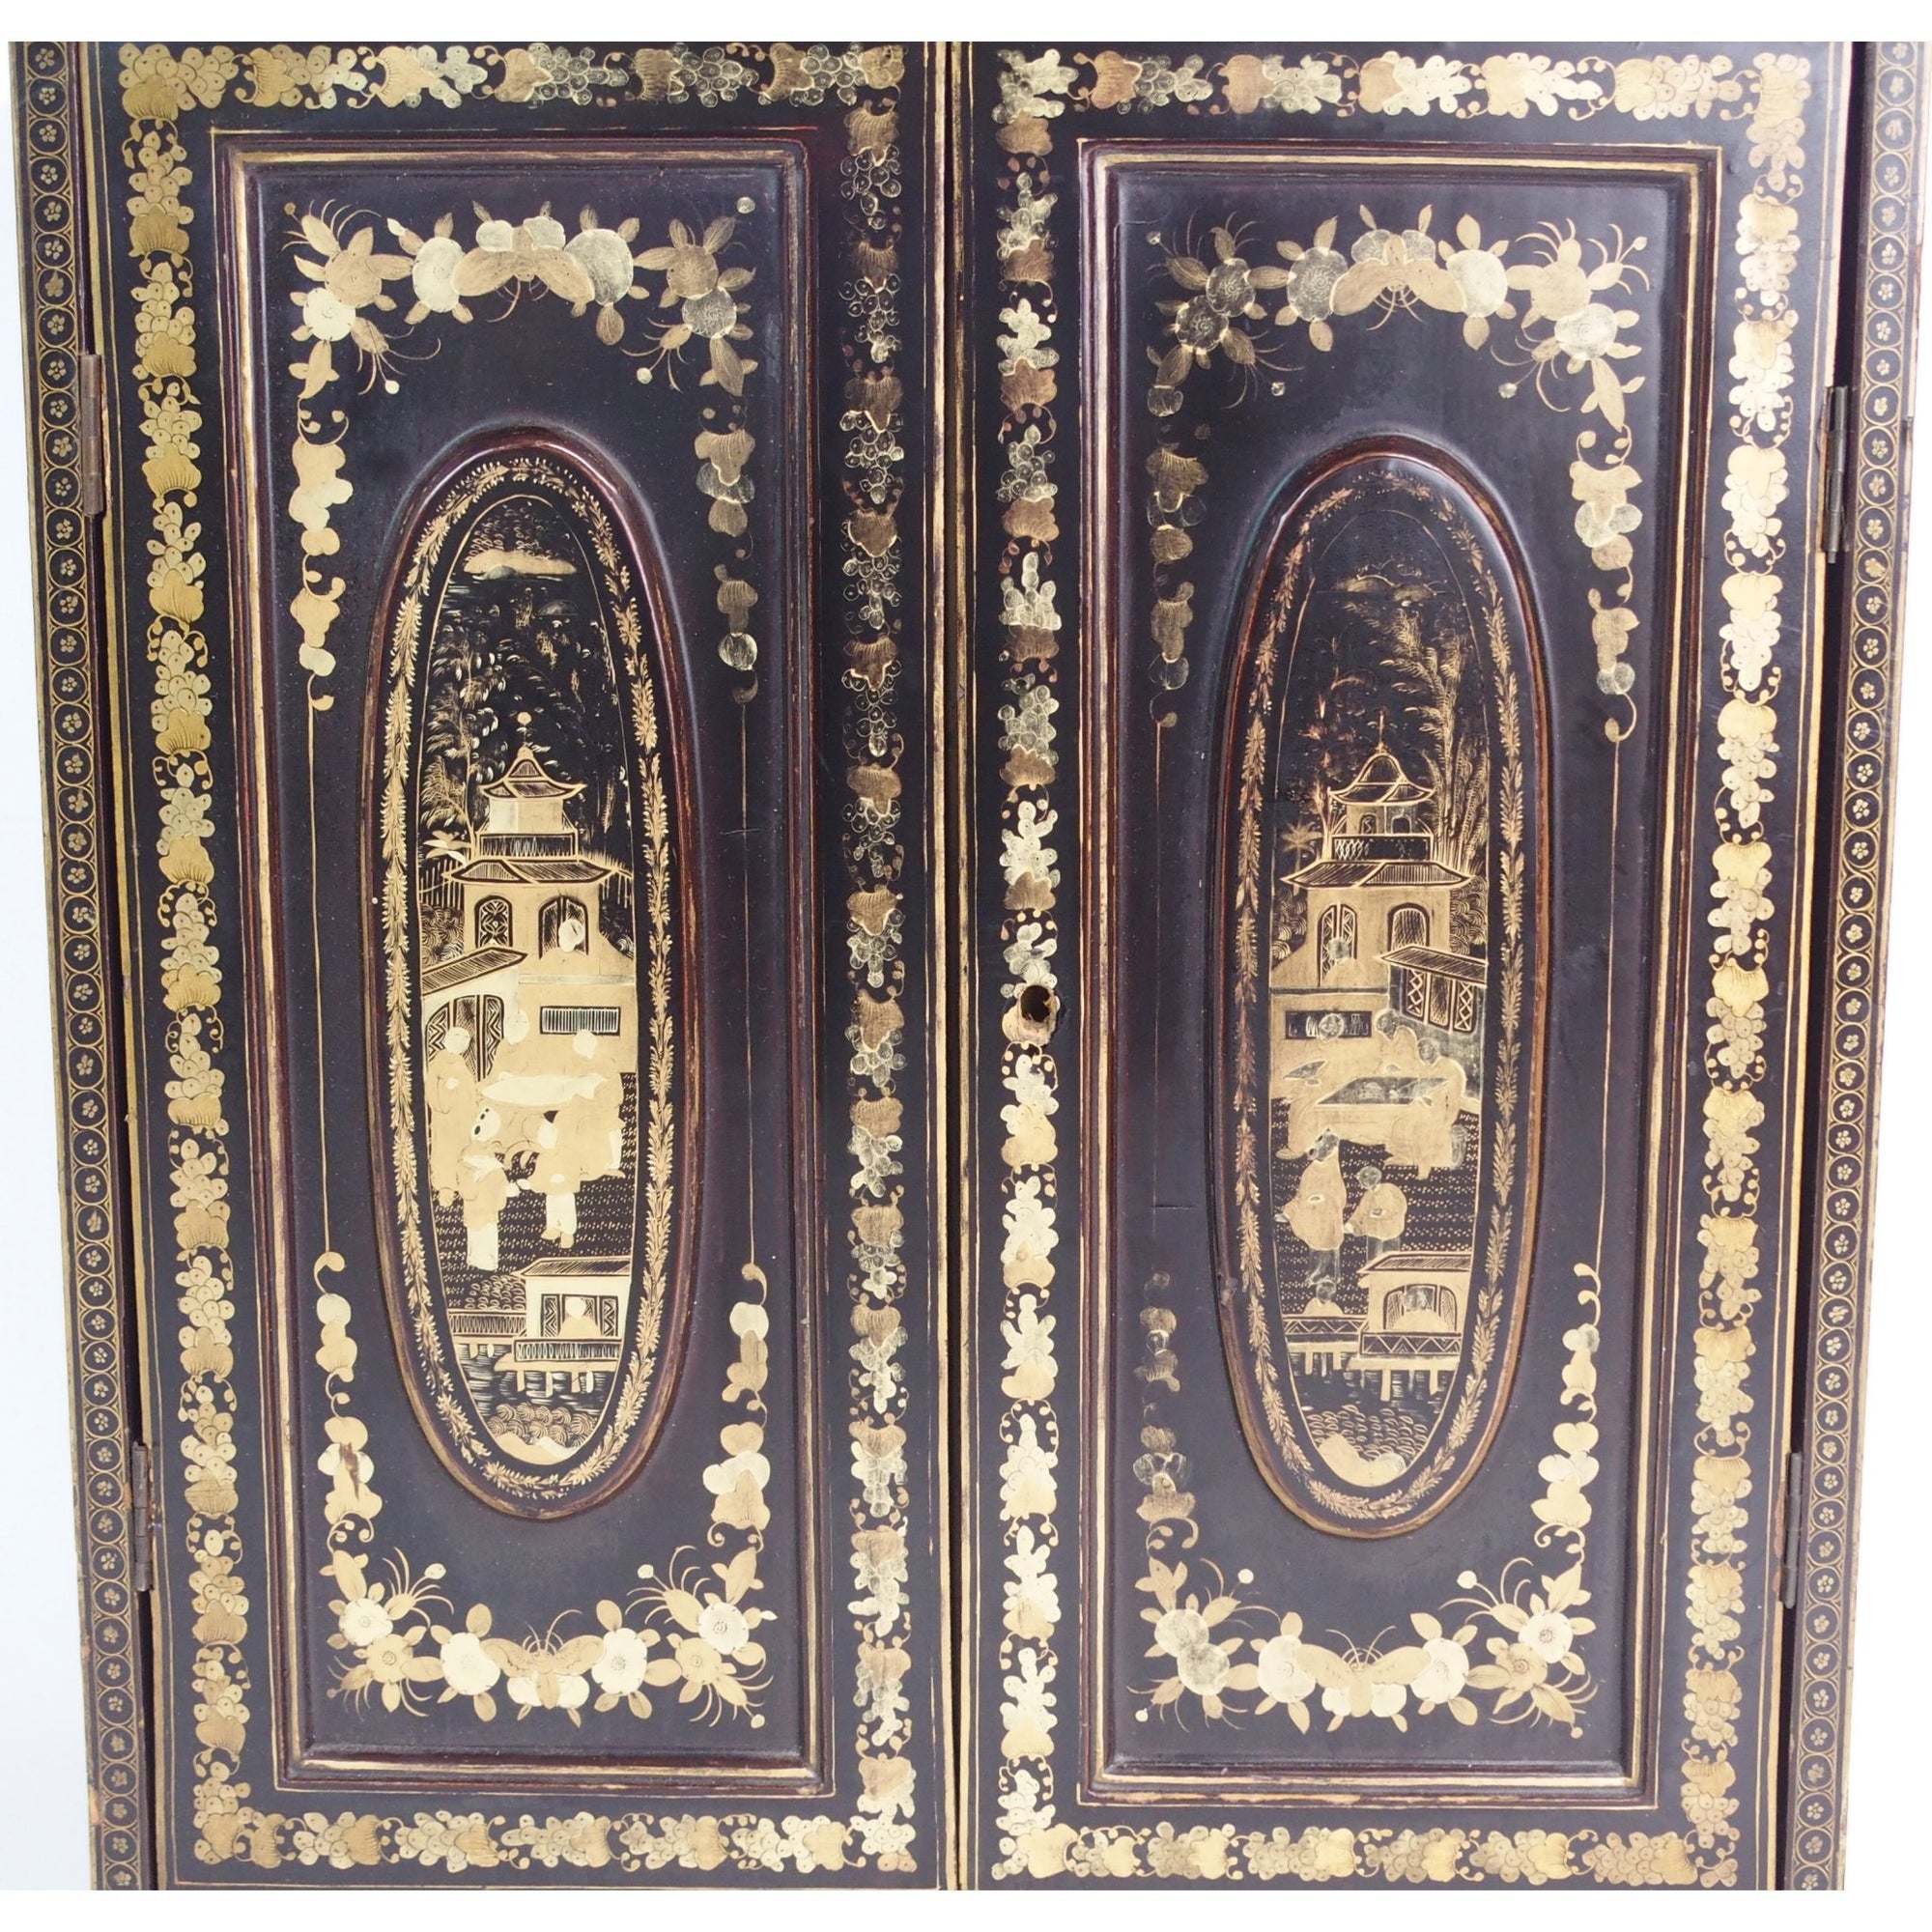 Gilt Black Lacquer Chinoiserie Jewellery Cabinet - Early 19thC - 42 x 20  x 48  (wxdxh cms) - M314